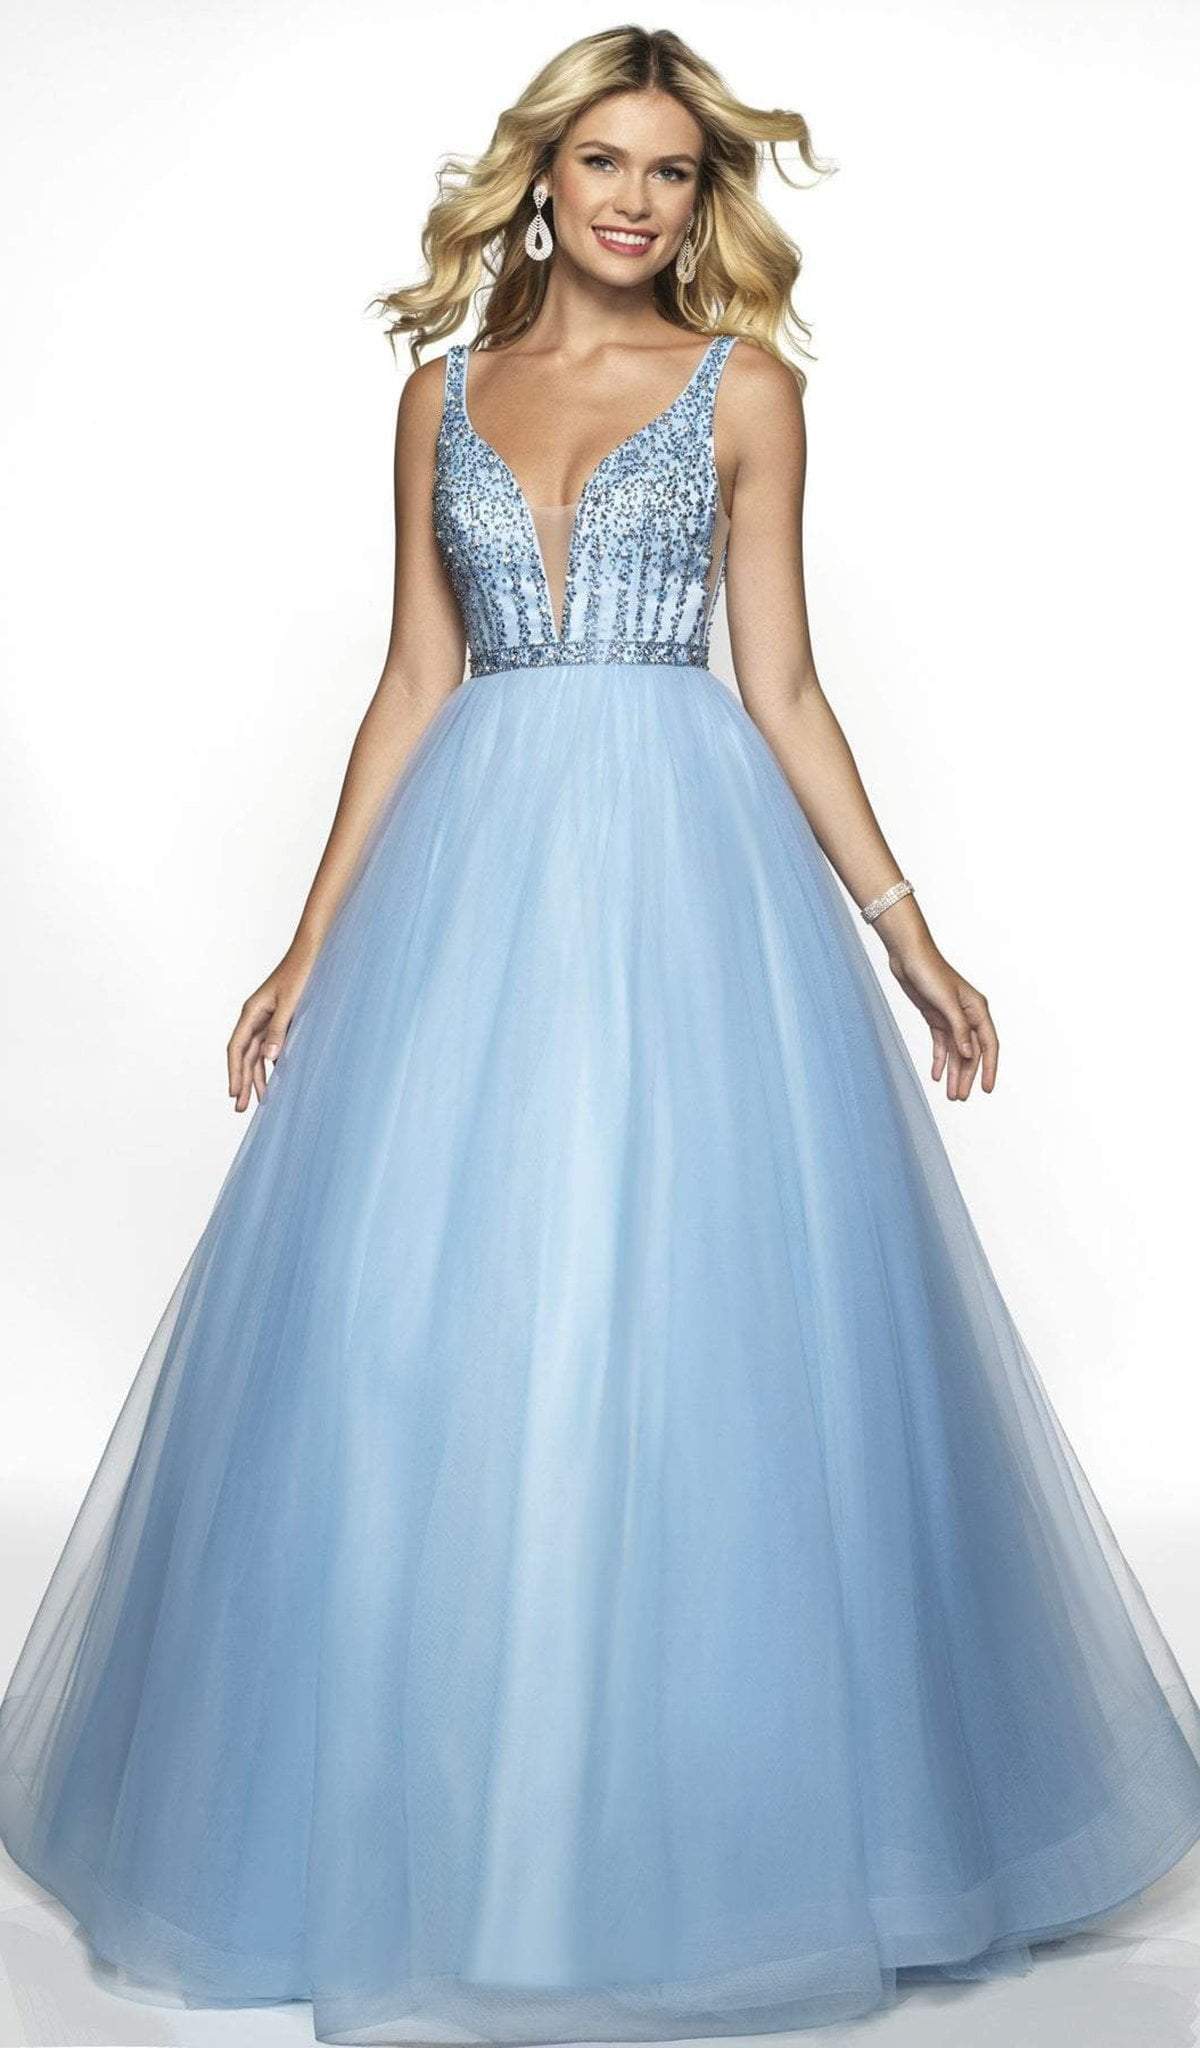 Blush by Alexia Designs - 5707 Beaded Deep V-neck Tulle Ballgown In Blue